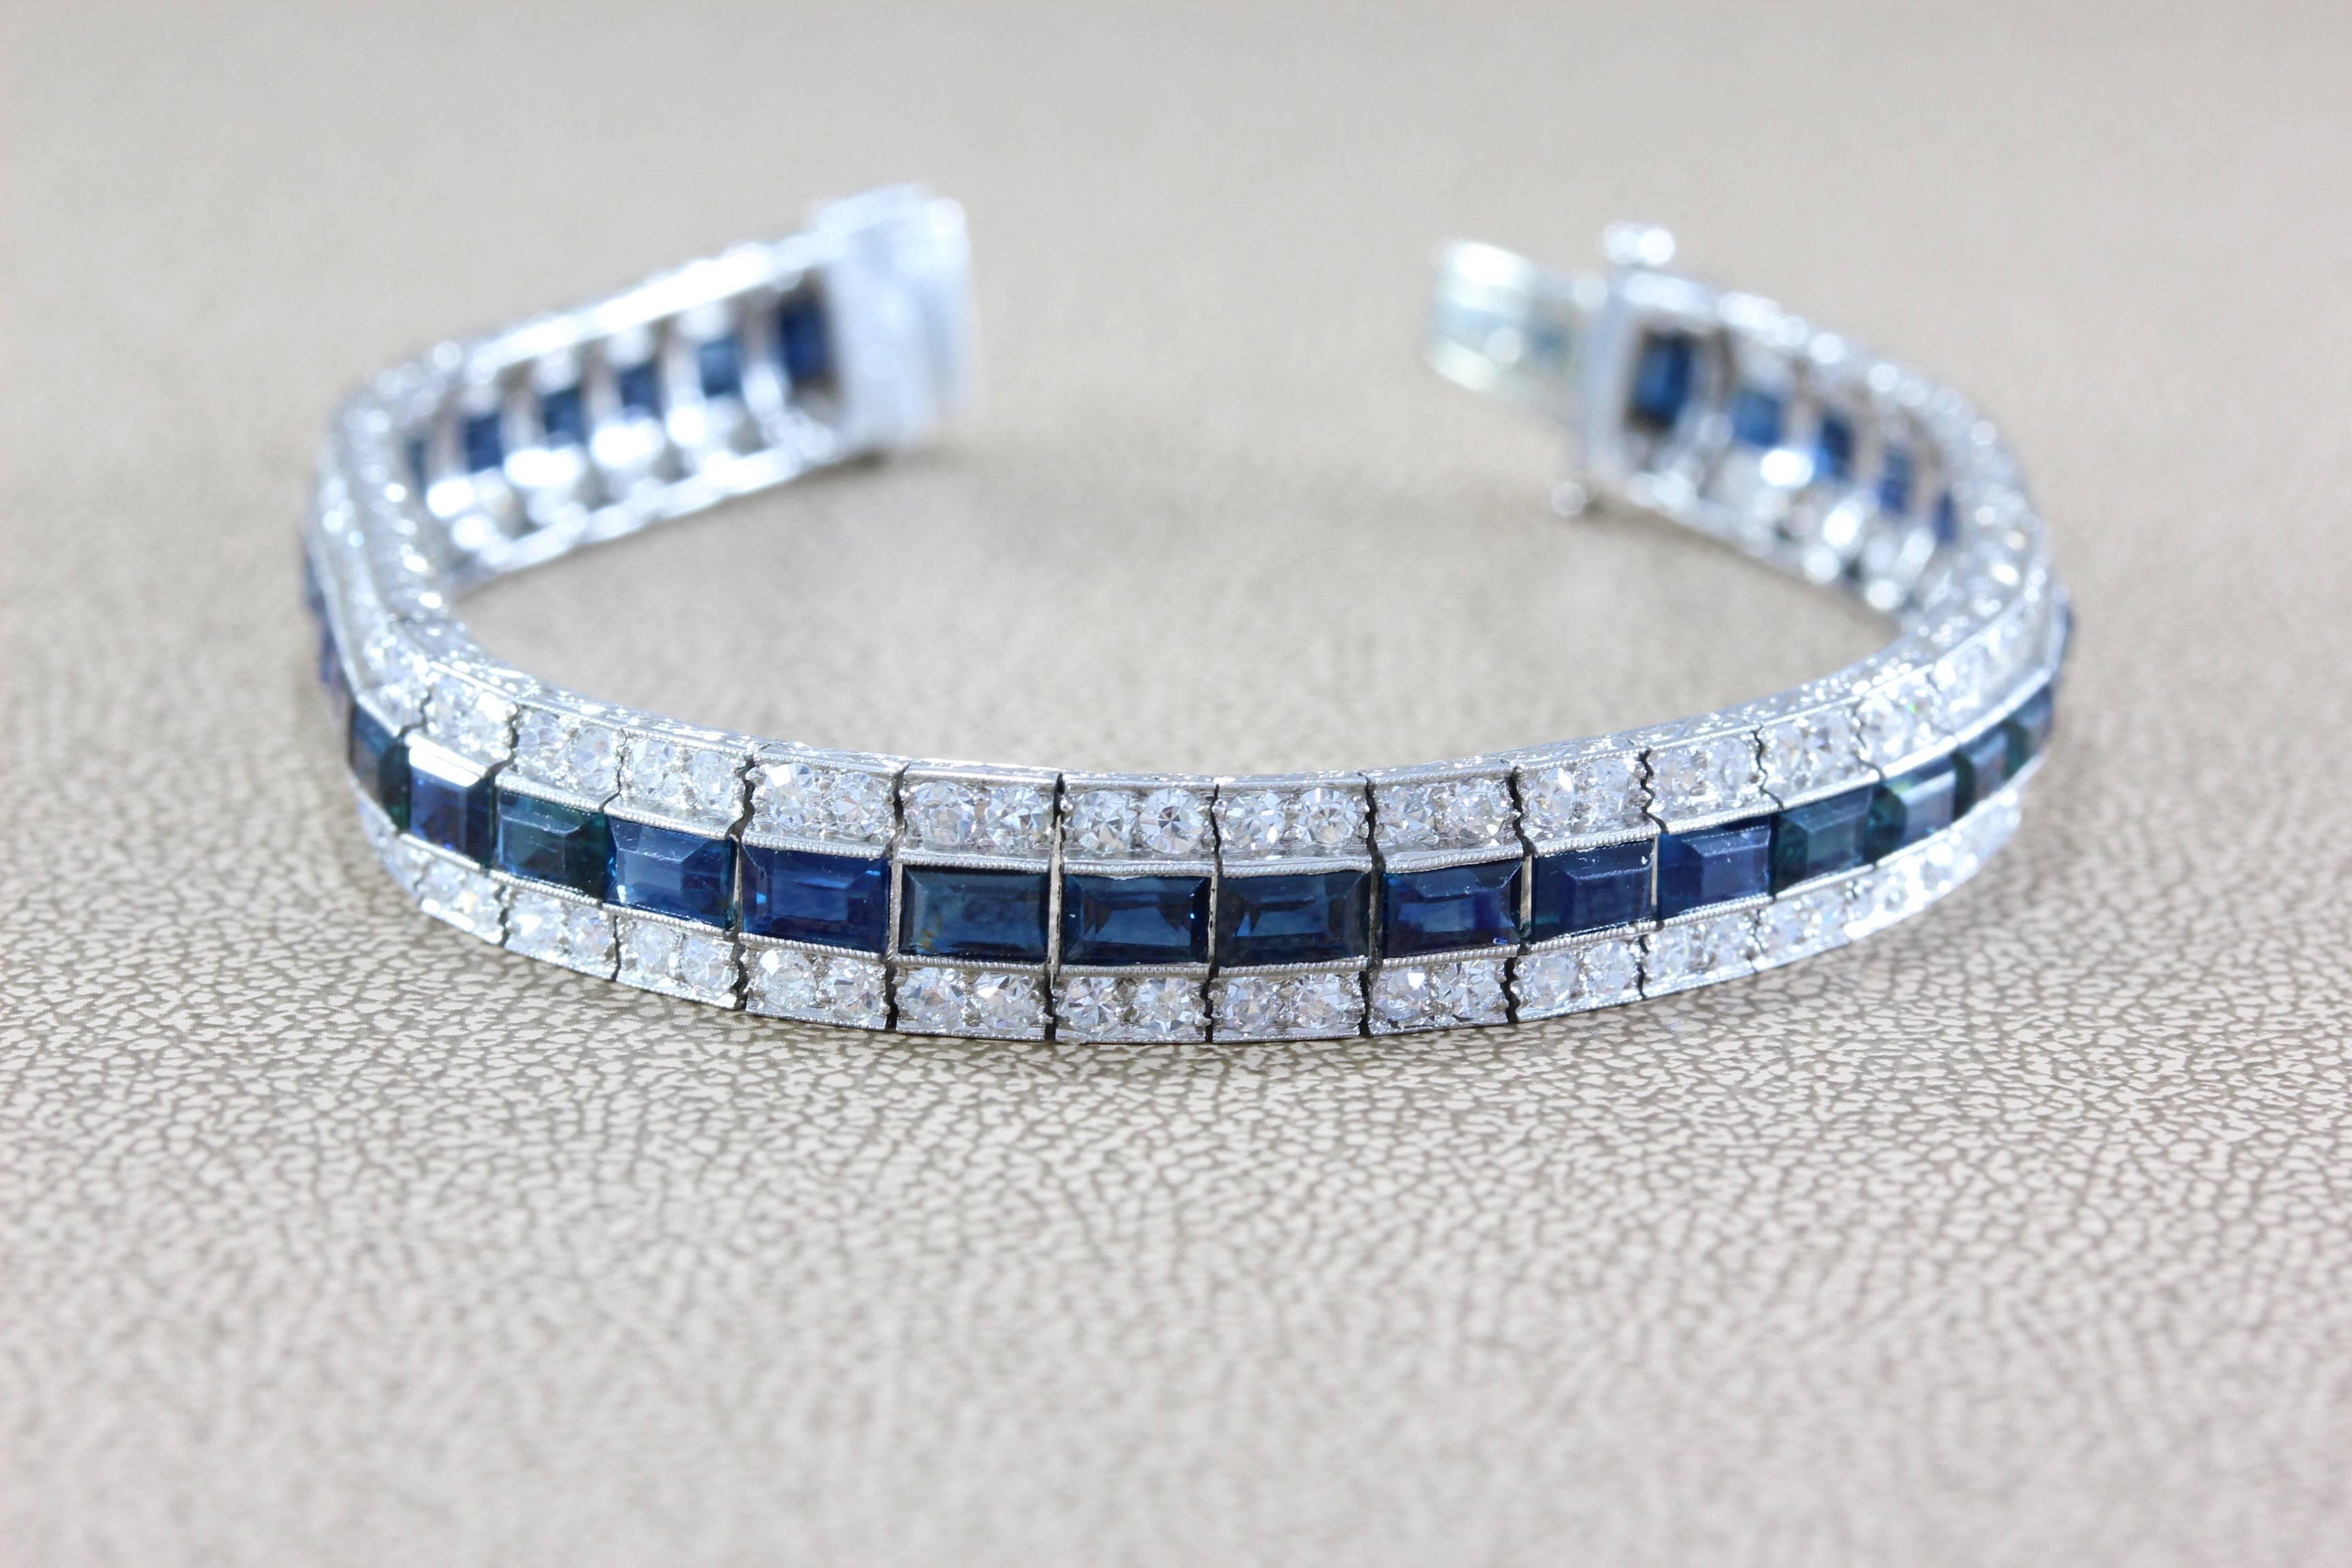 This stunning Art Deco bracelet features 3.10 carats of diamonds complemented by 3.90 carats of square cut sapphire all set in platinum with a beautiful scroll motif on the sides of the bracelet.

Dimensions: 6.50 x 0.25 inches